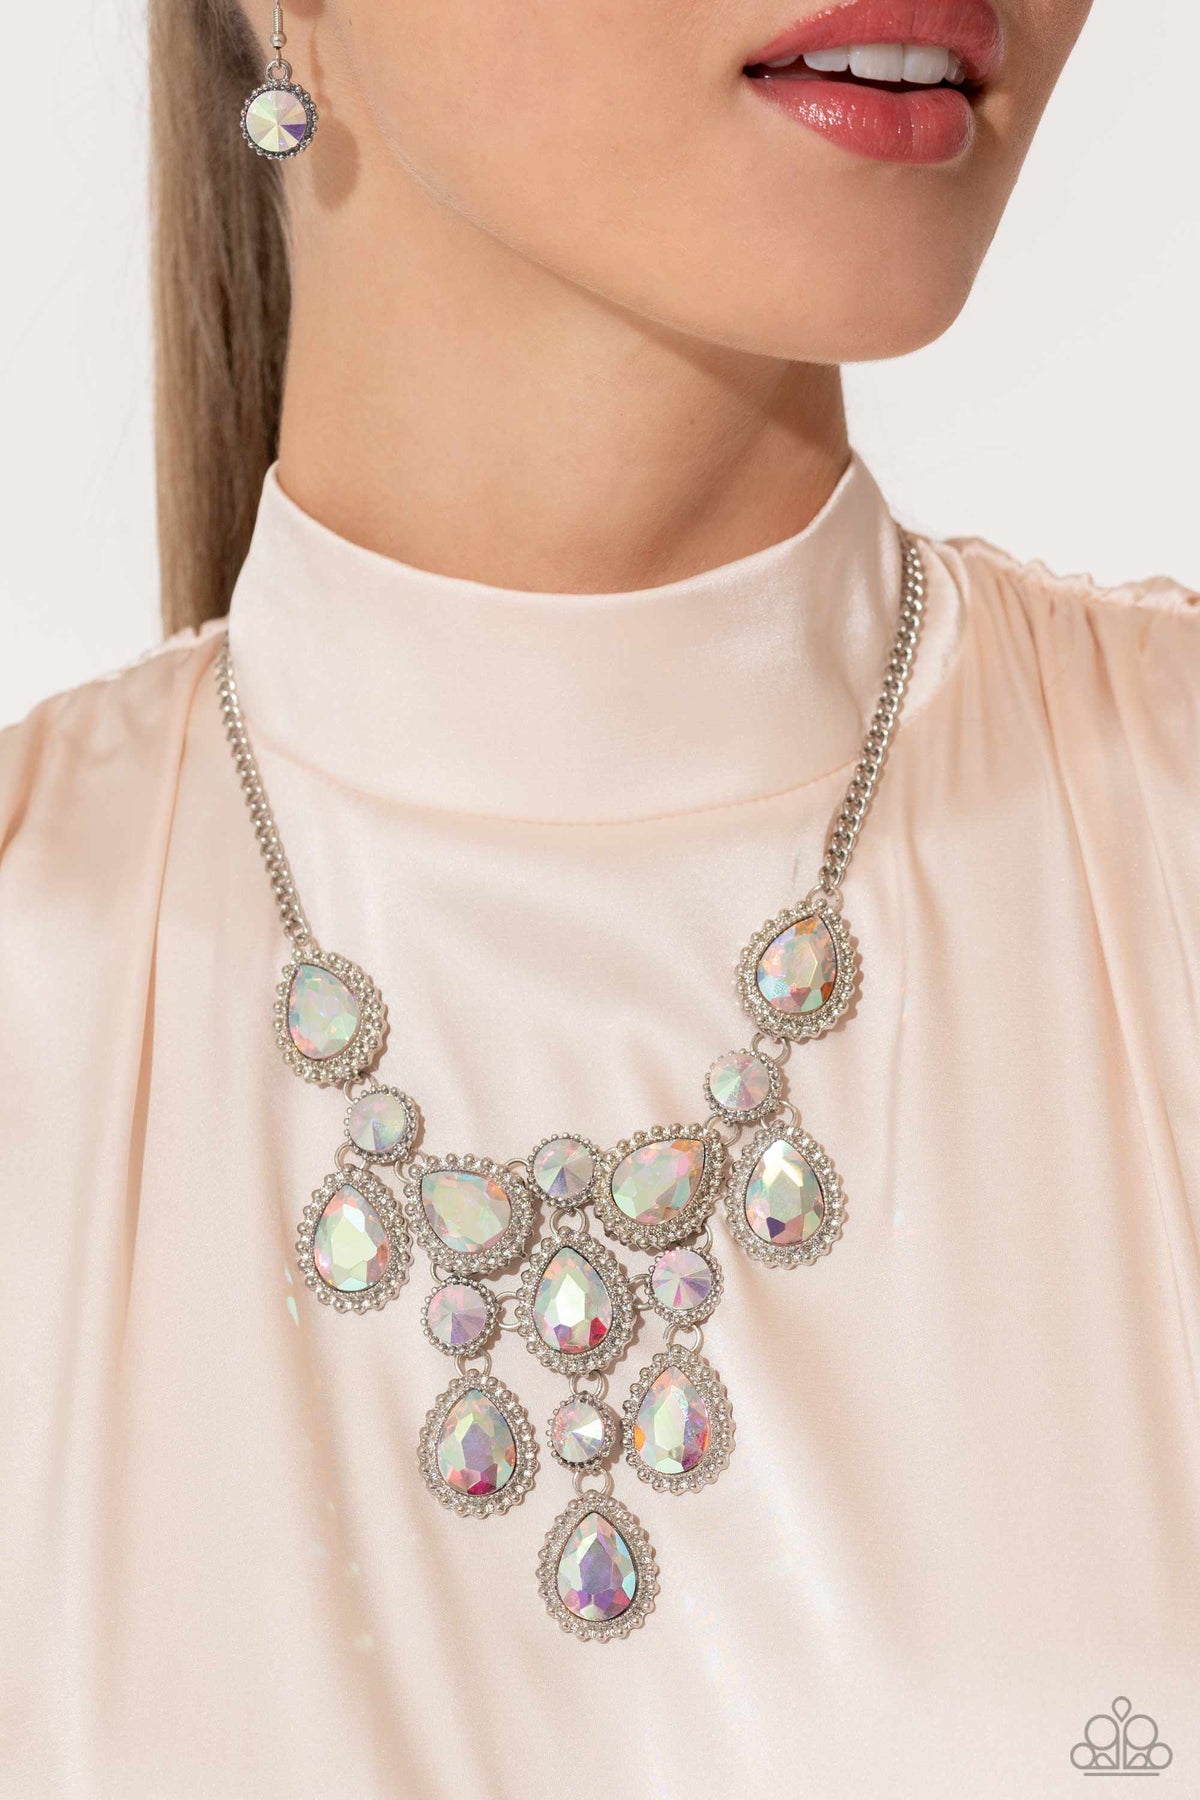 Dripping in Dazzle Multi Iridescent Rhinestone Necklace - Paparazzi Accessories-on model - CarasShop.com - $5 Jewelry by Cara Jewels